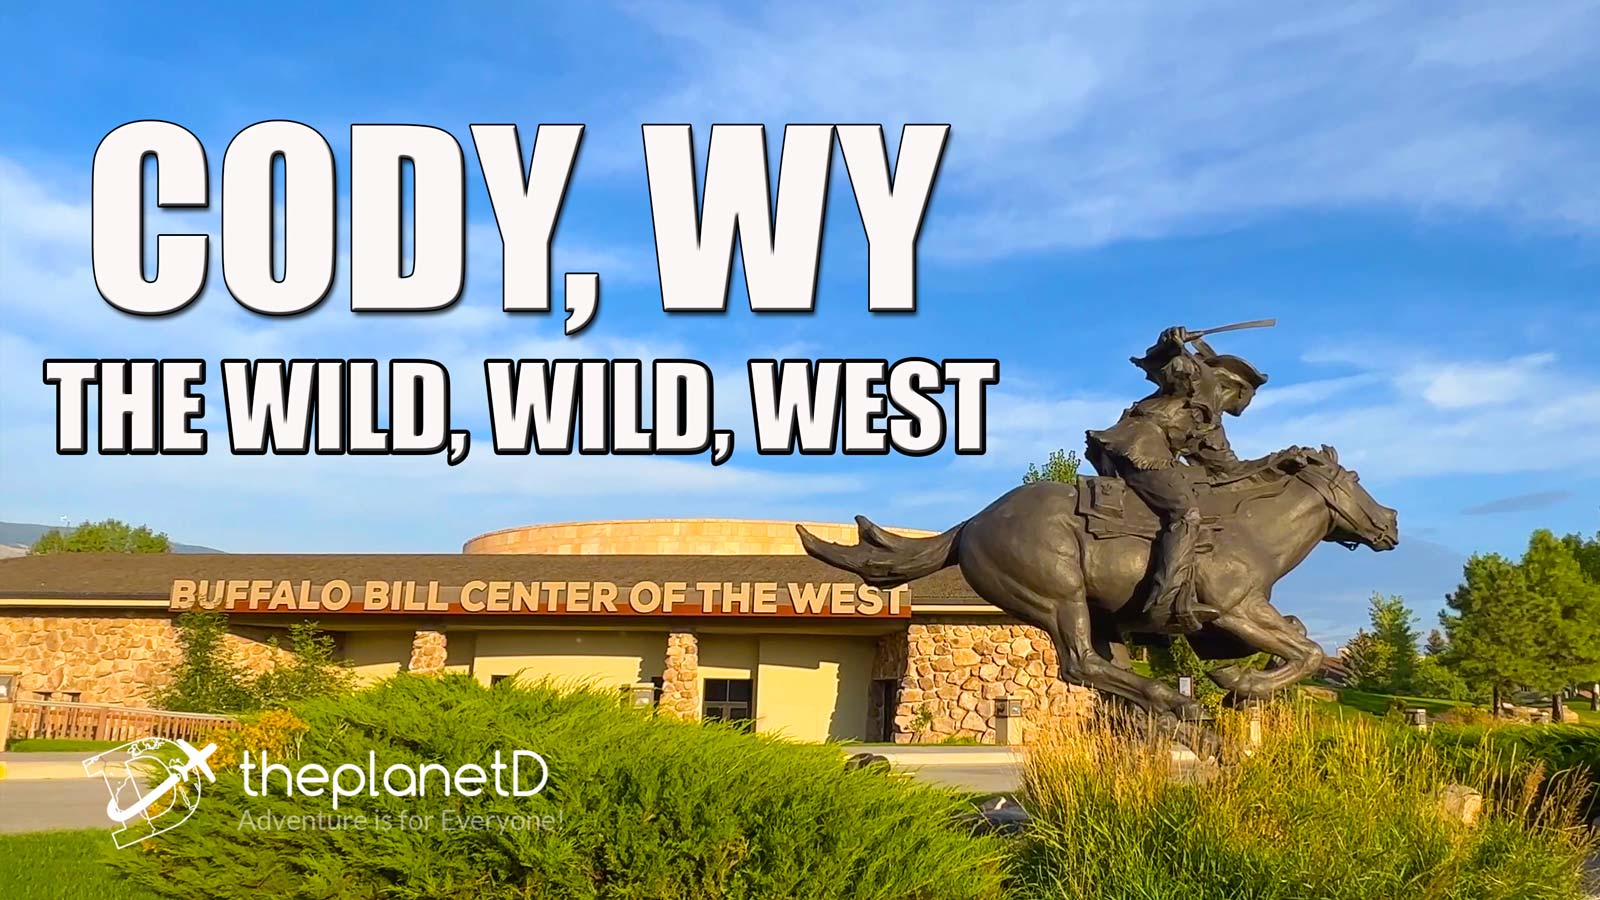 things to do in cody wyoming video